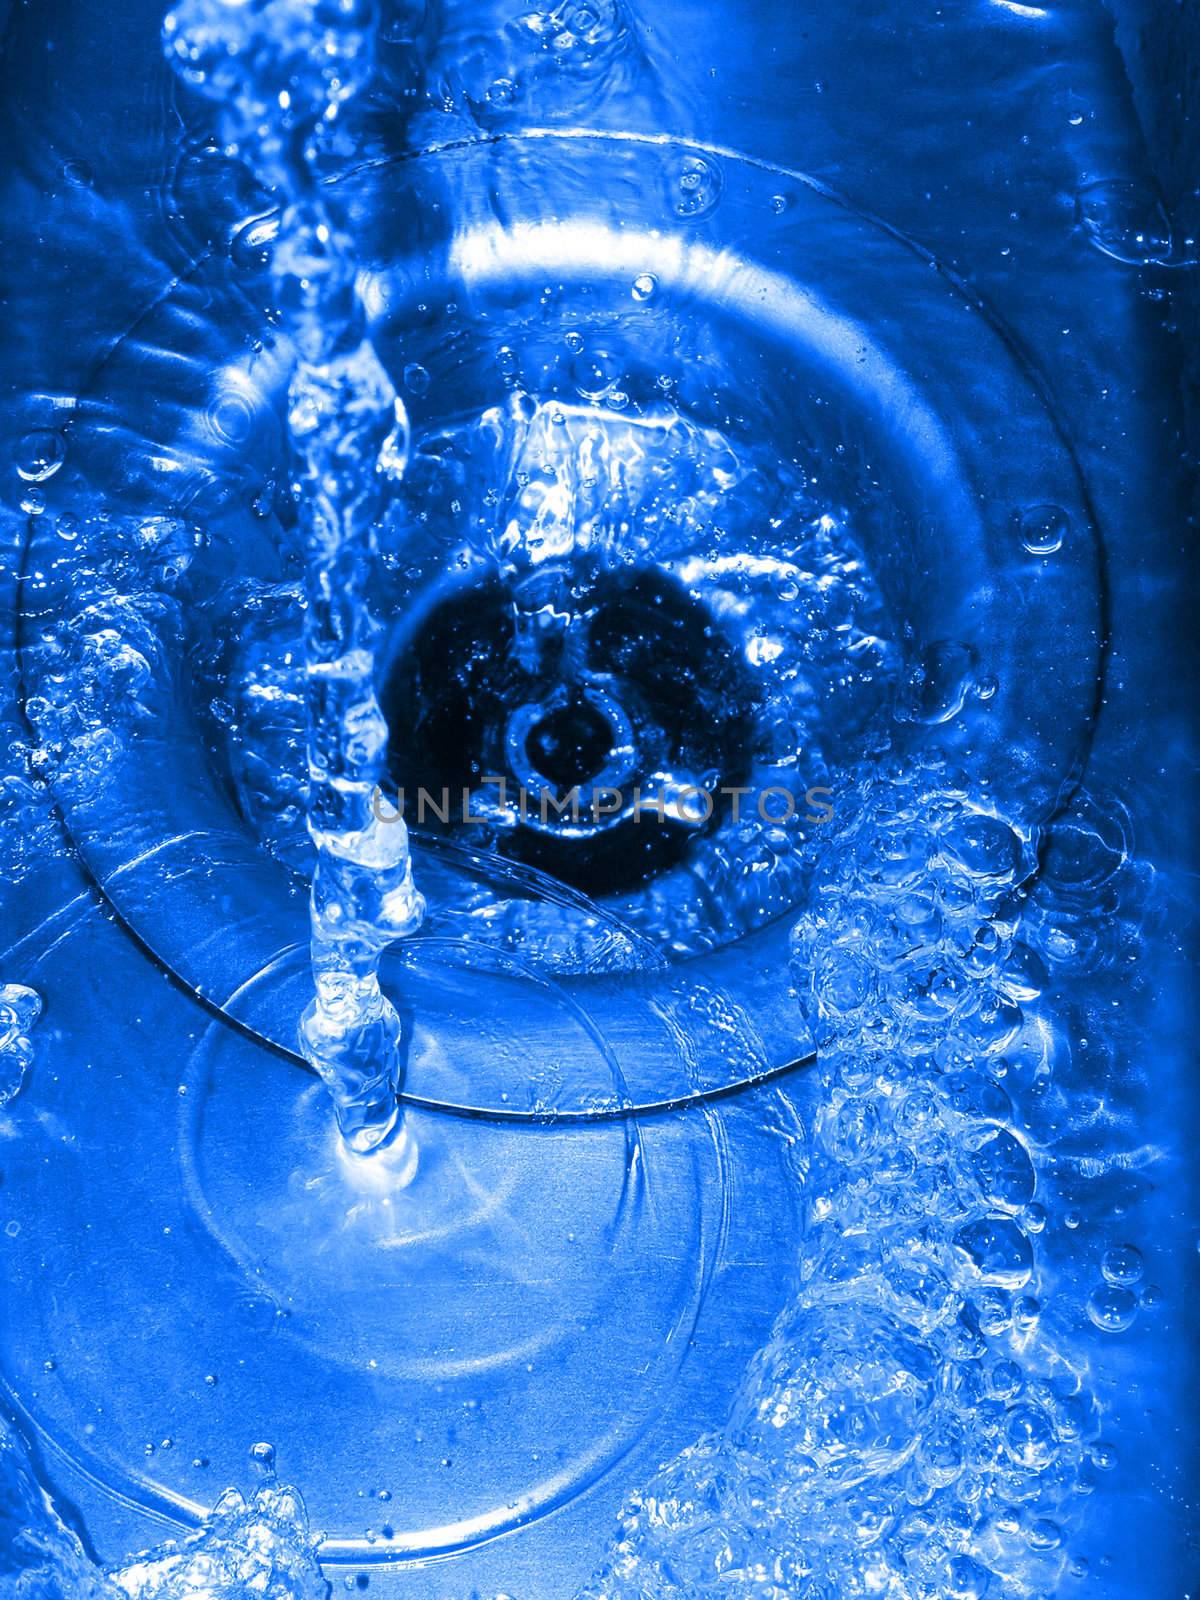 blue cast water going down a plughole or drain